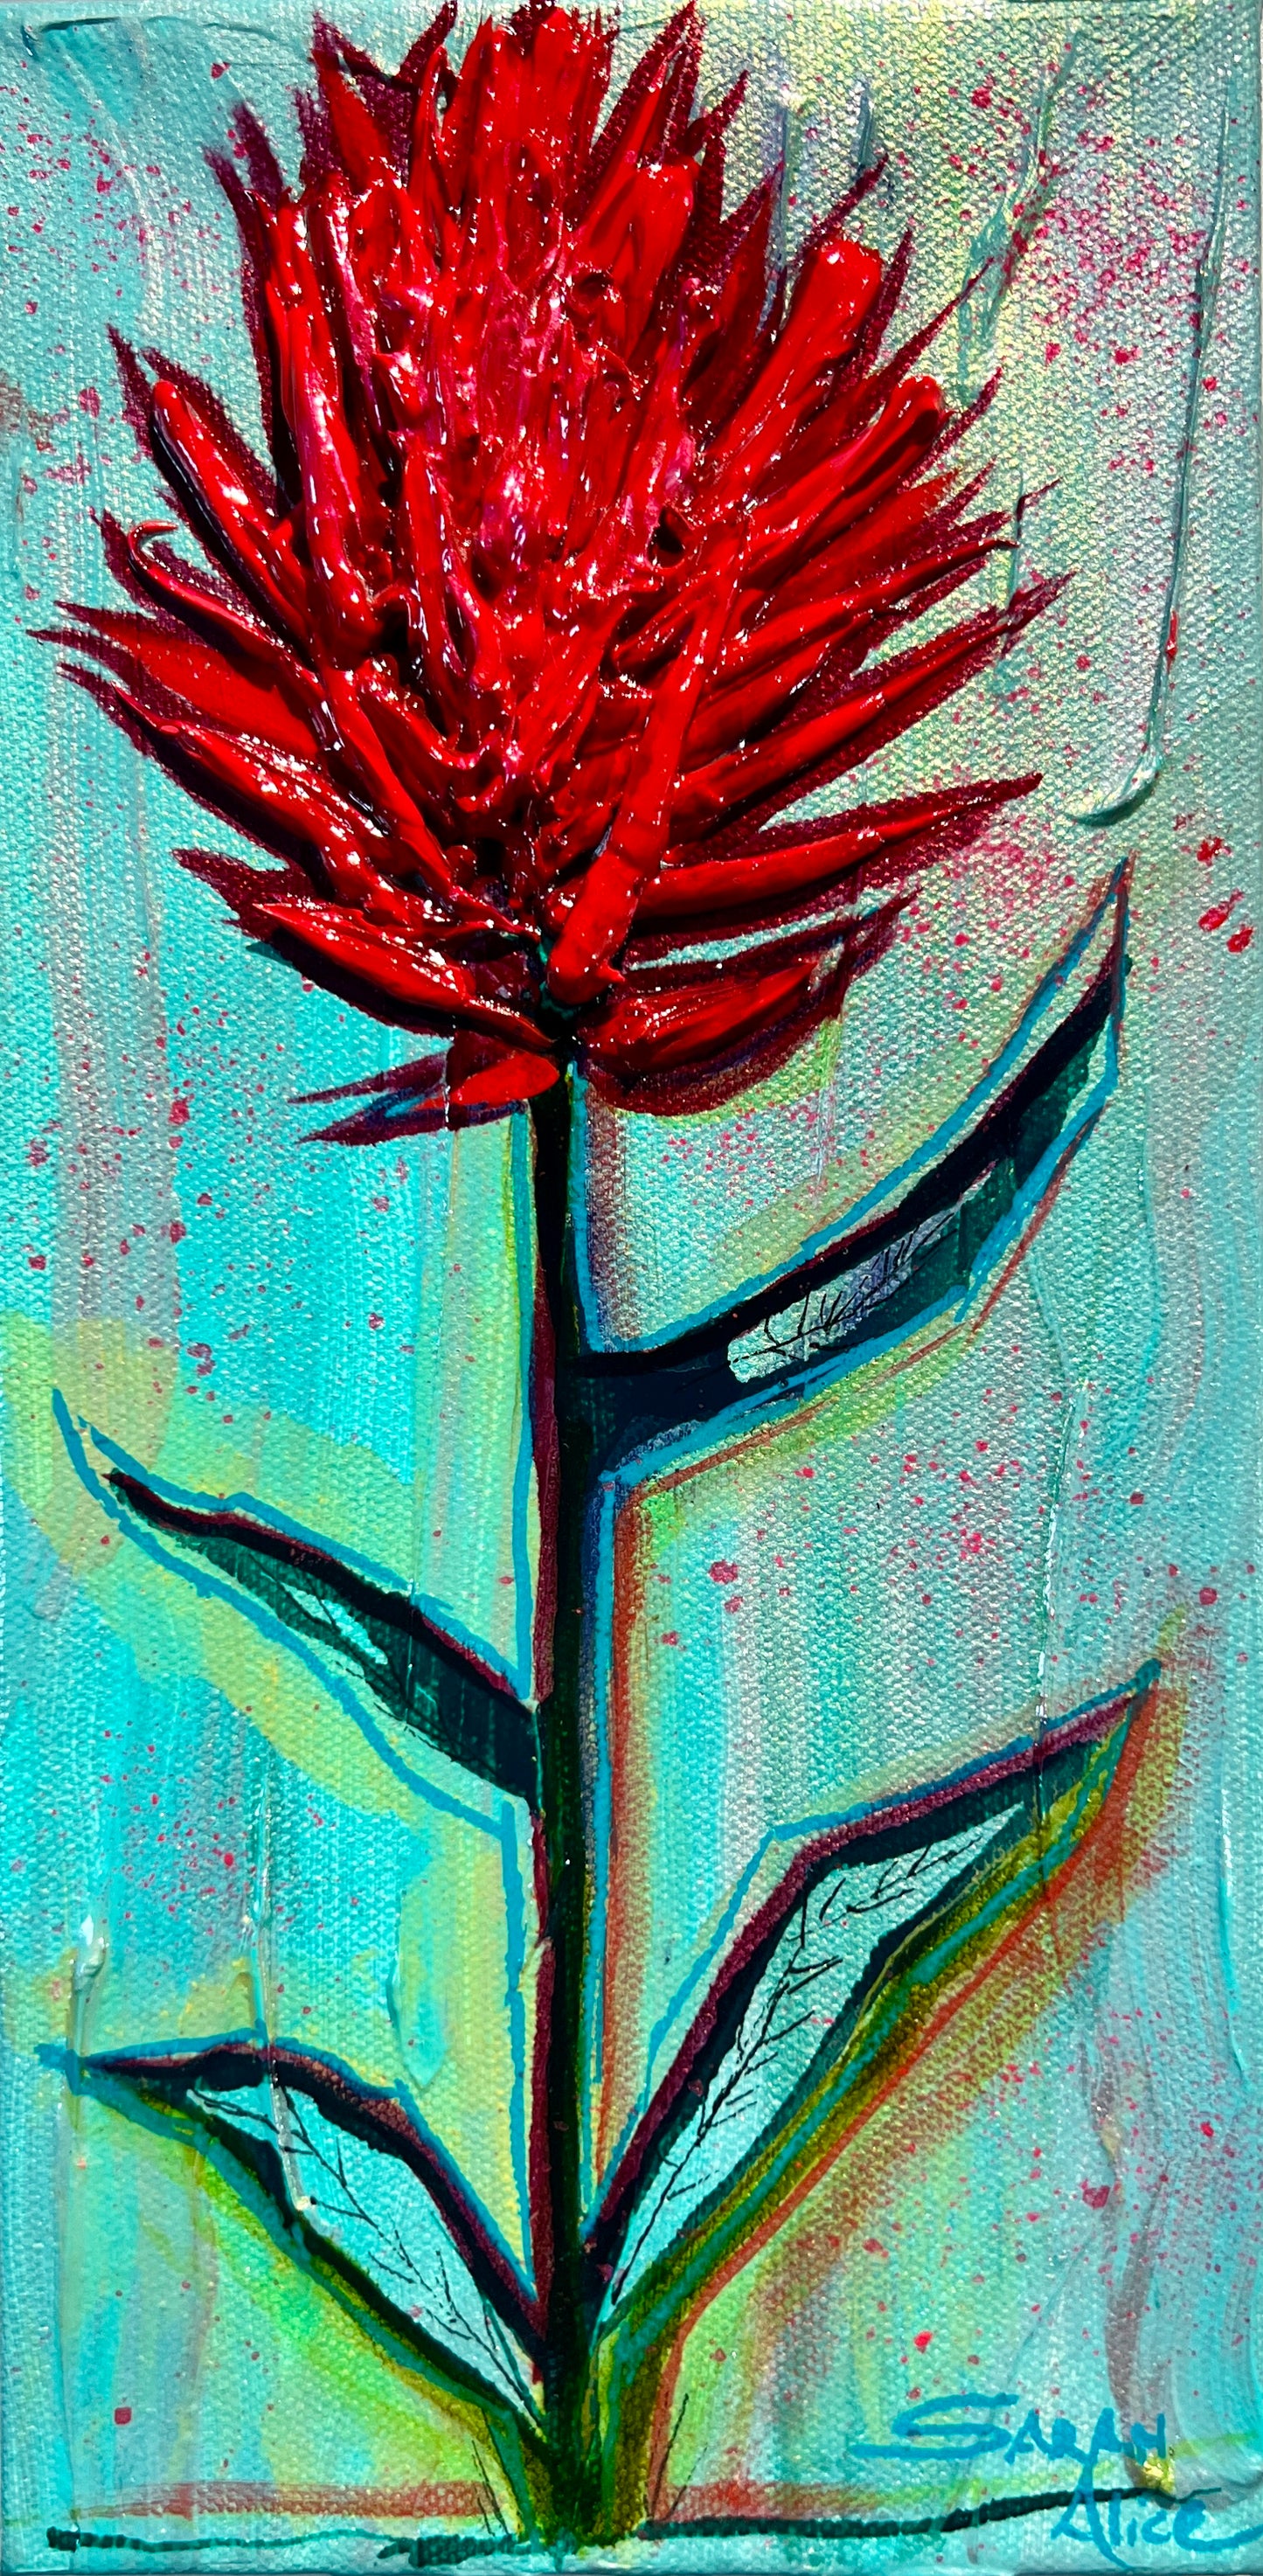 <h1>" Azure Bloom " Indian Paintbrush Original Textured Painting</h1> <h1>Original Painting</h1> <h2>Artist:&nbsp;Sarah Alice Art<br></h2> <p>Original Textured Painting</p> <p>Vertical painting</p> <p>Canvas wrapped on wooden frame</p> <p>Teal green background with one Indian Paintbrush flower</p> <p>Textured flower <br></p> <p>Hand drawn leaves and stem<br></p> <p>Acrylic and ink<br></p> <p>Wire attached for hanging<br></p> <p>6" Long x 12" high x 1.5" wide</p>